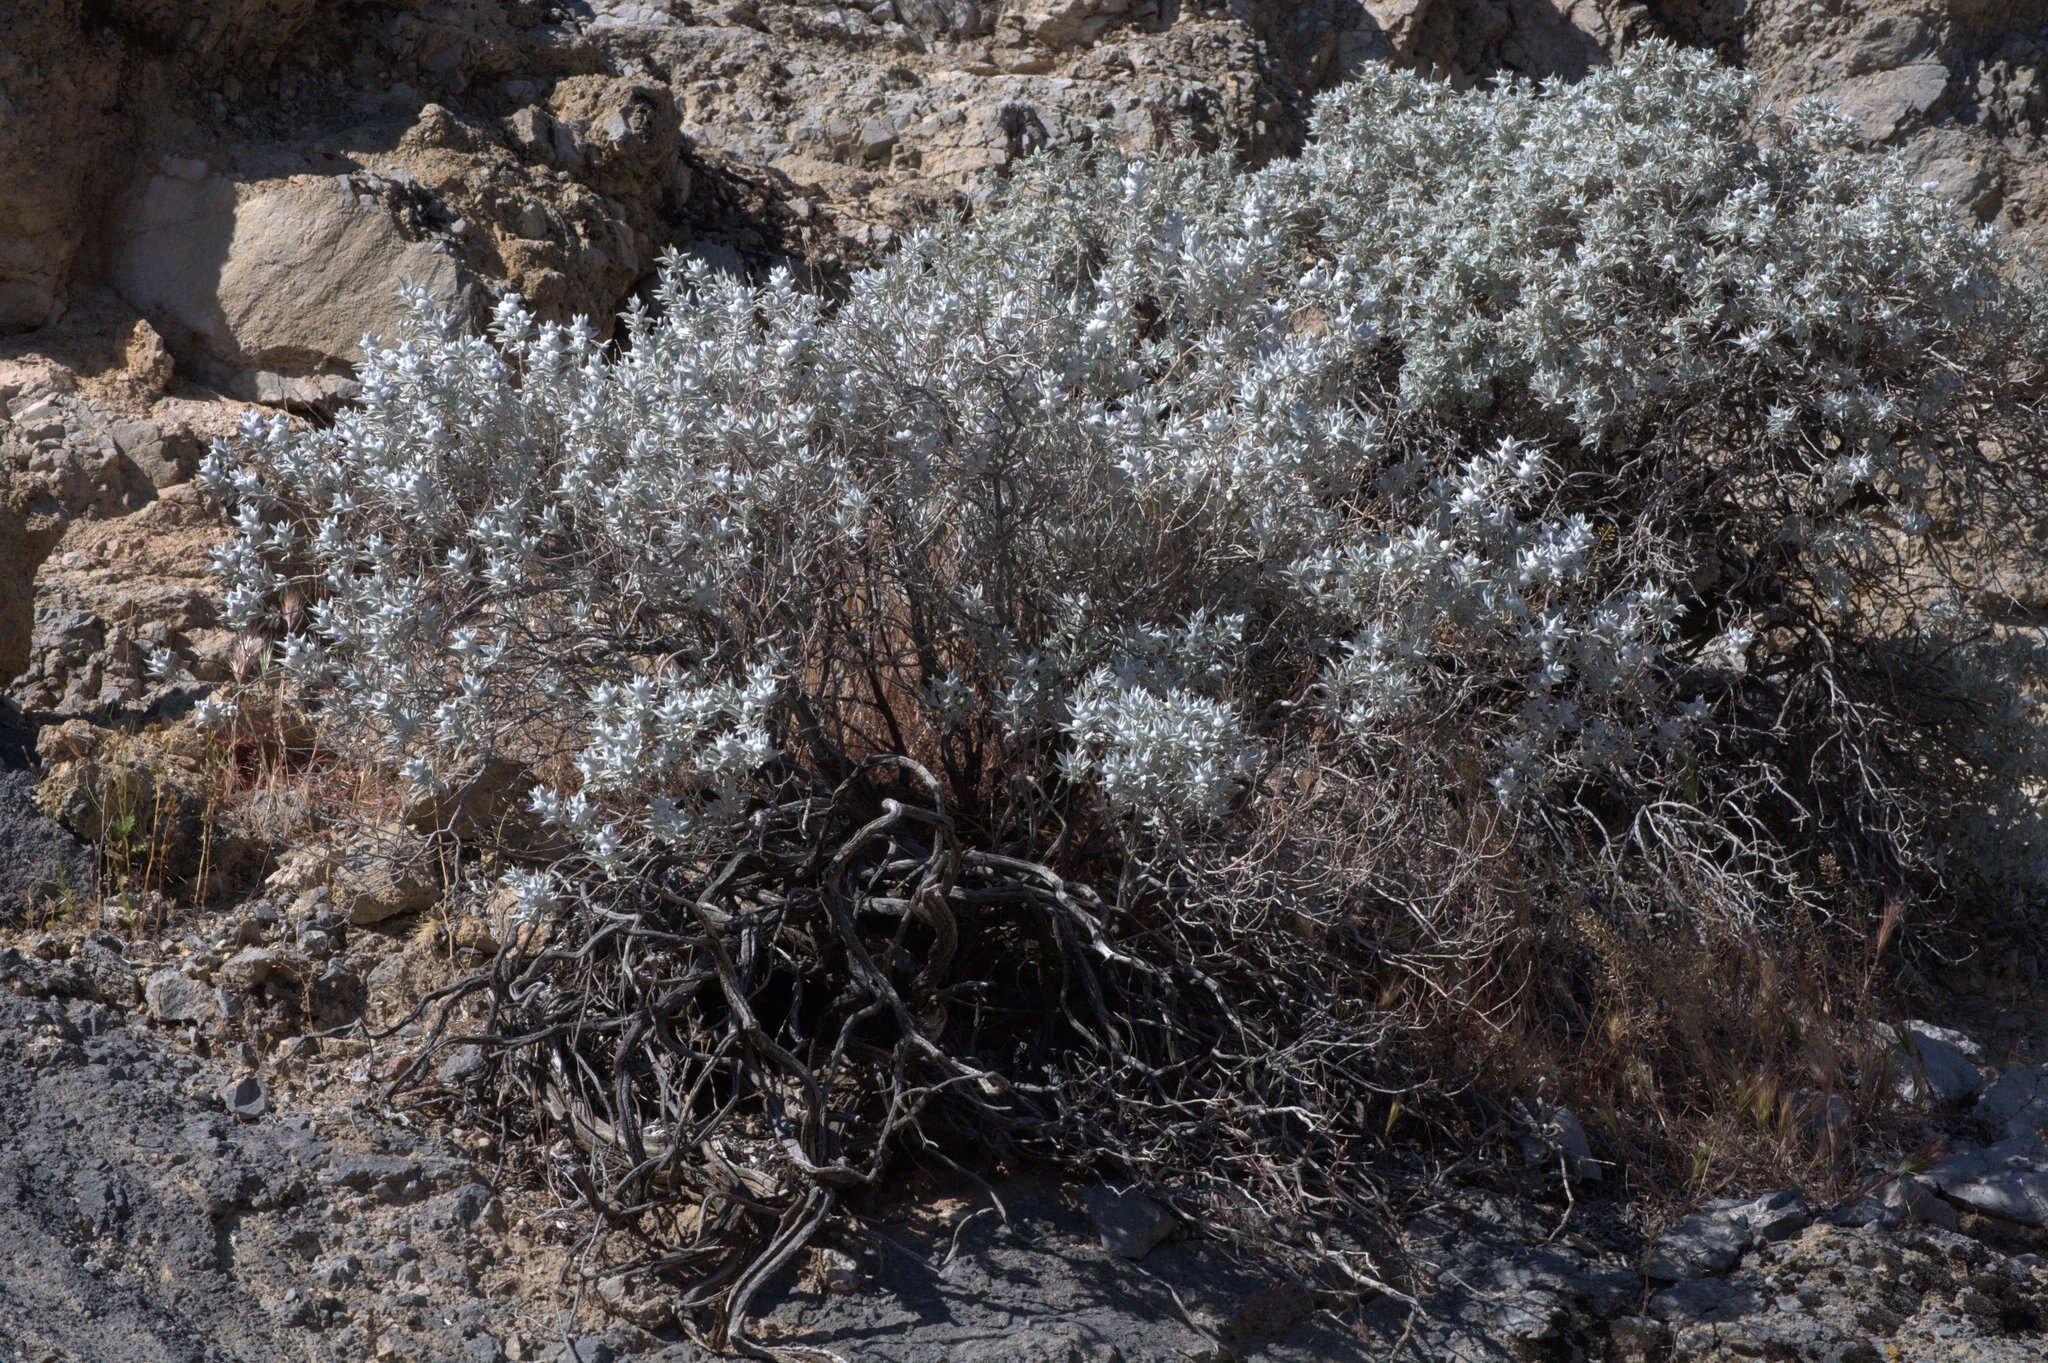 Image of woolly sage